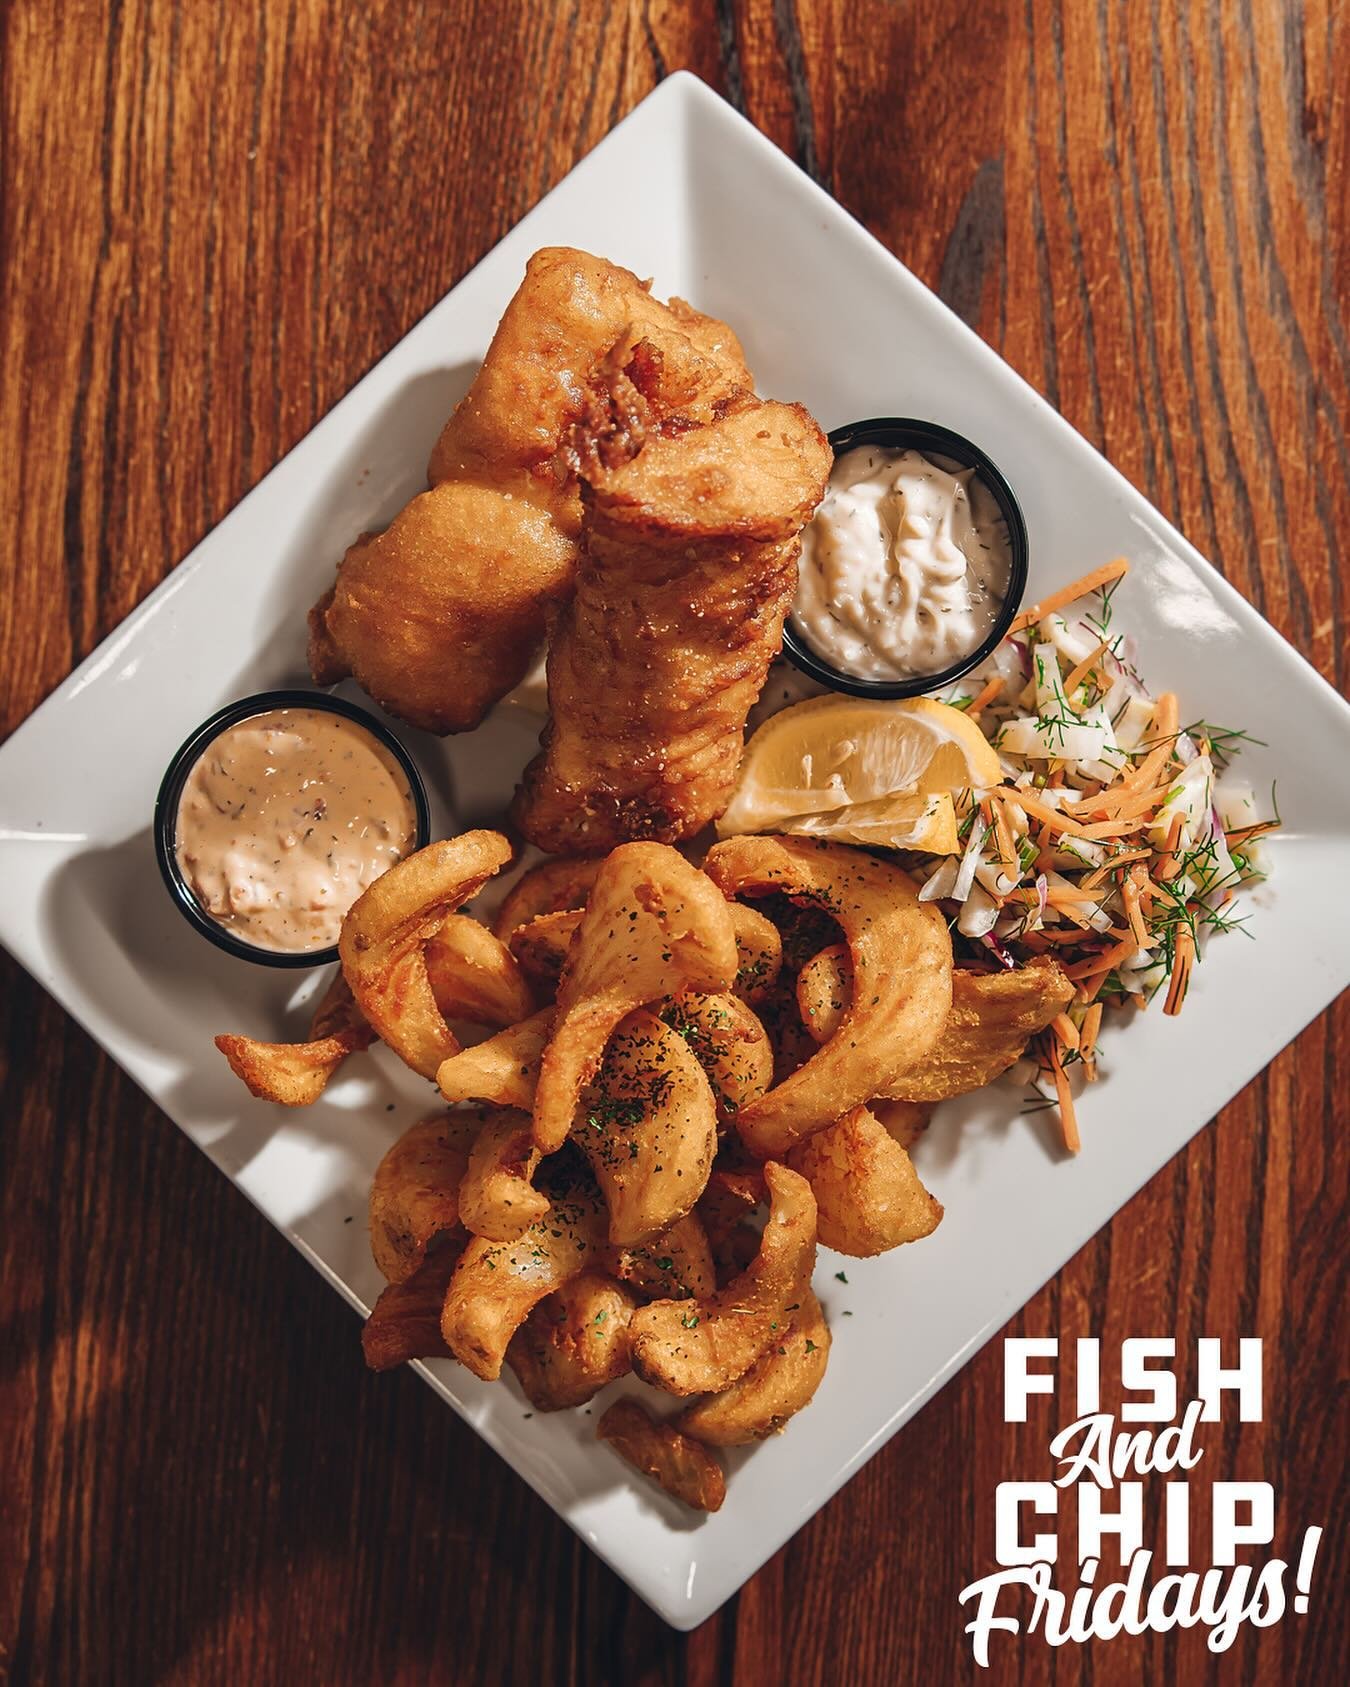 It&rsquo;s that time of week! 🐟 

.
.
.
.
.
#odearbar #odearbarportland #odearbarandgrill #fishandchips #pdxfood #pdxfoodie #pdxfishandchips